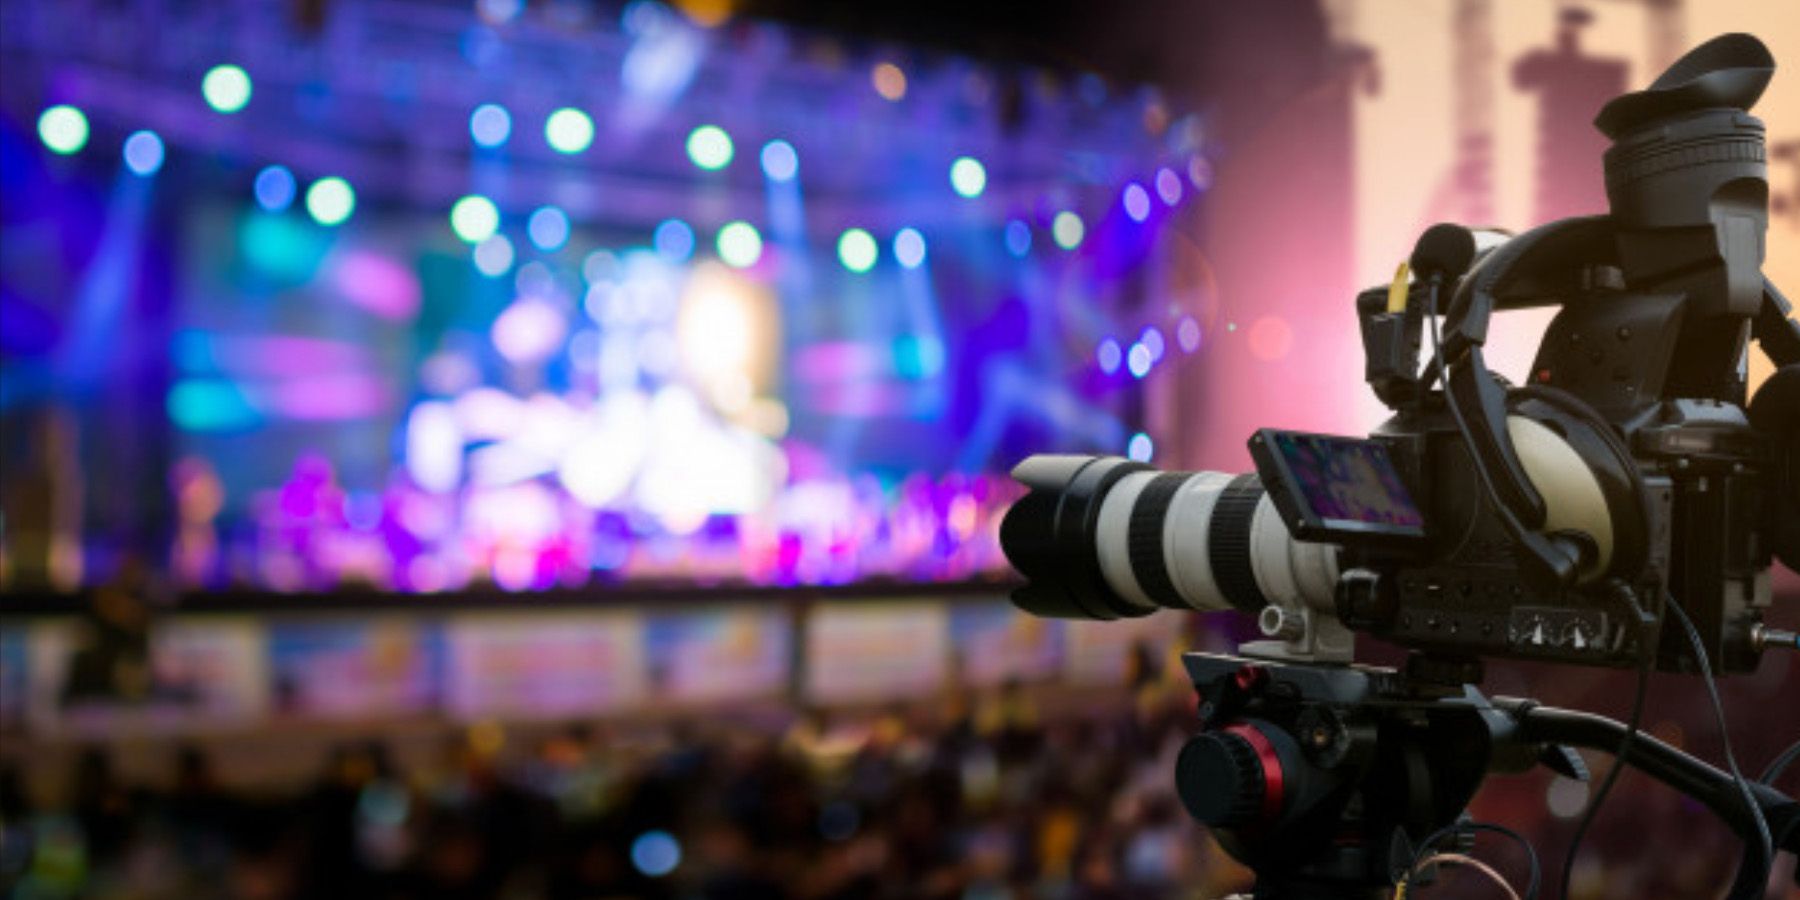 Corporate video production company for your brand promotion